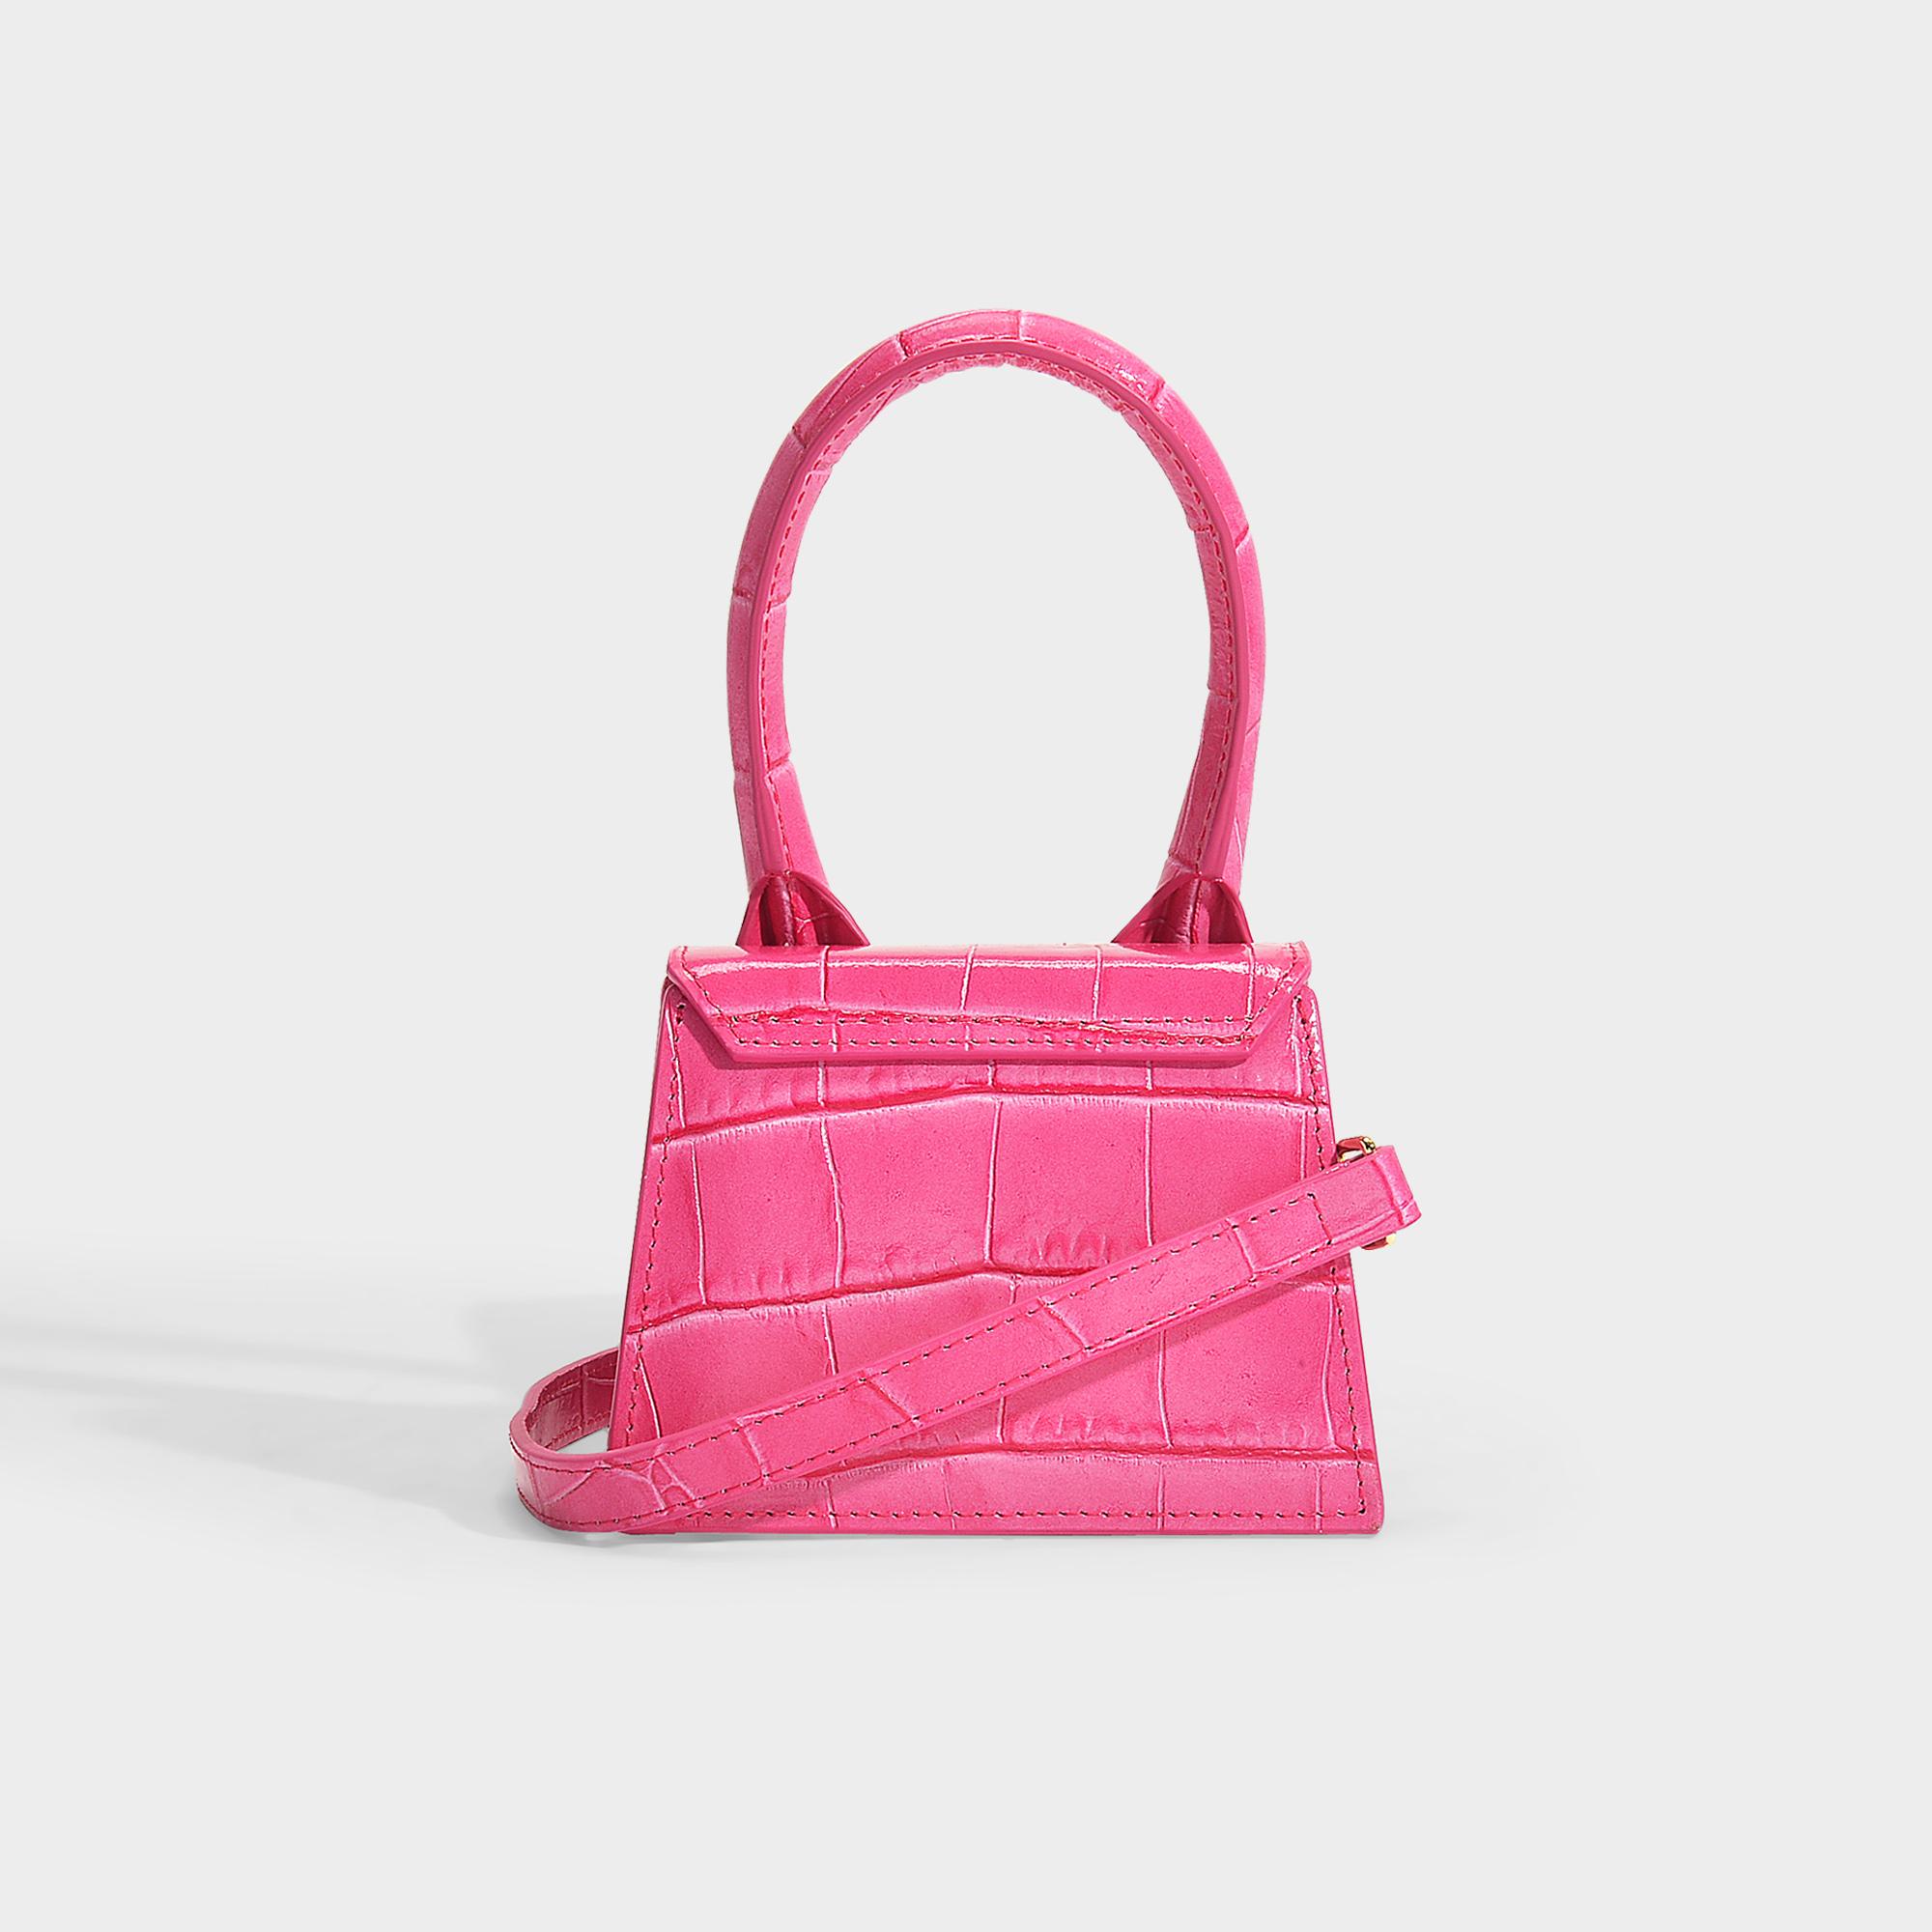 Jacquemus Le Chiquito Bag In Pink Calfskin in Pink - Lyst